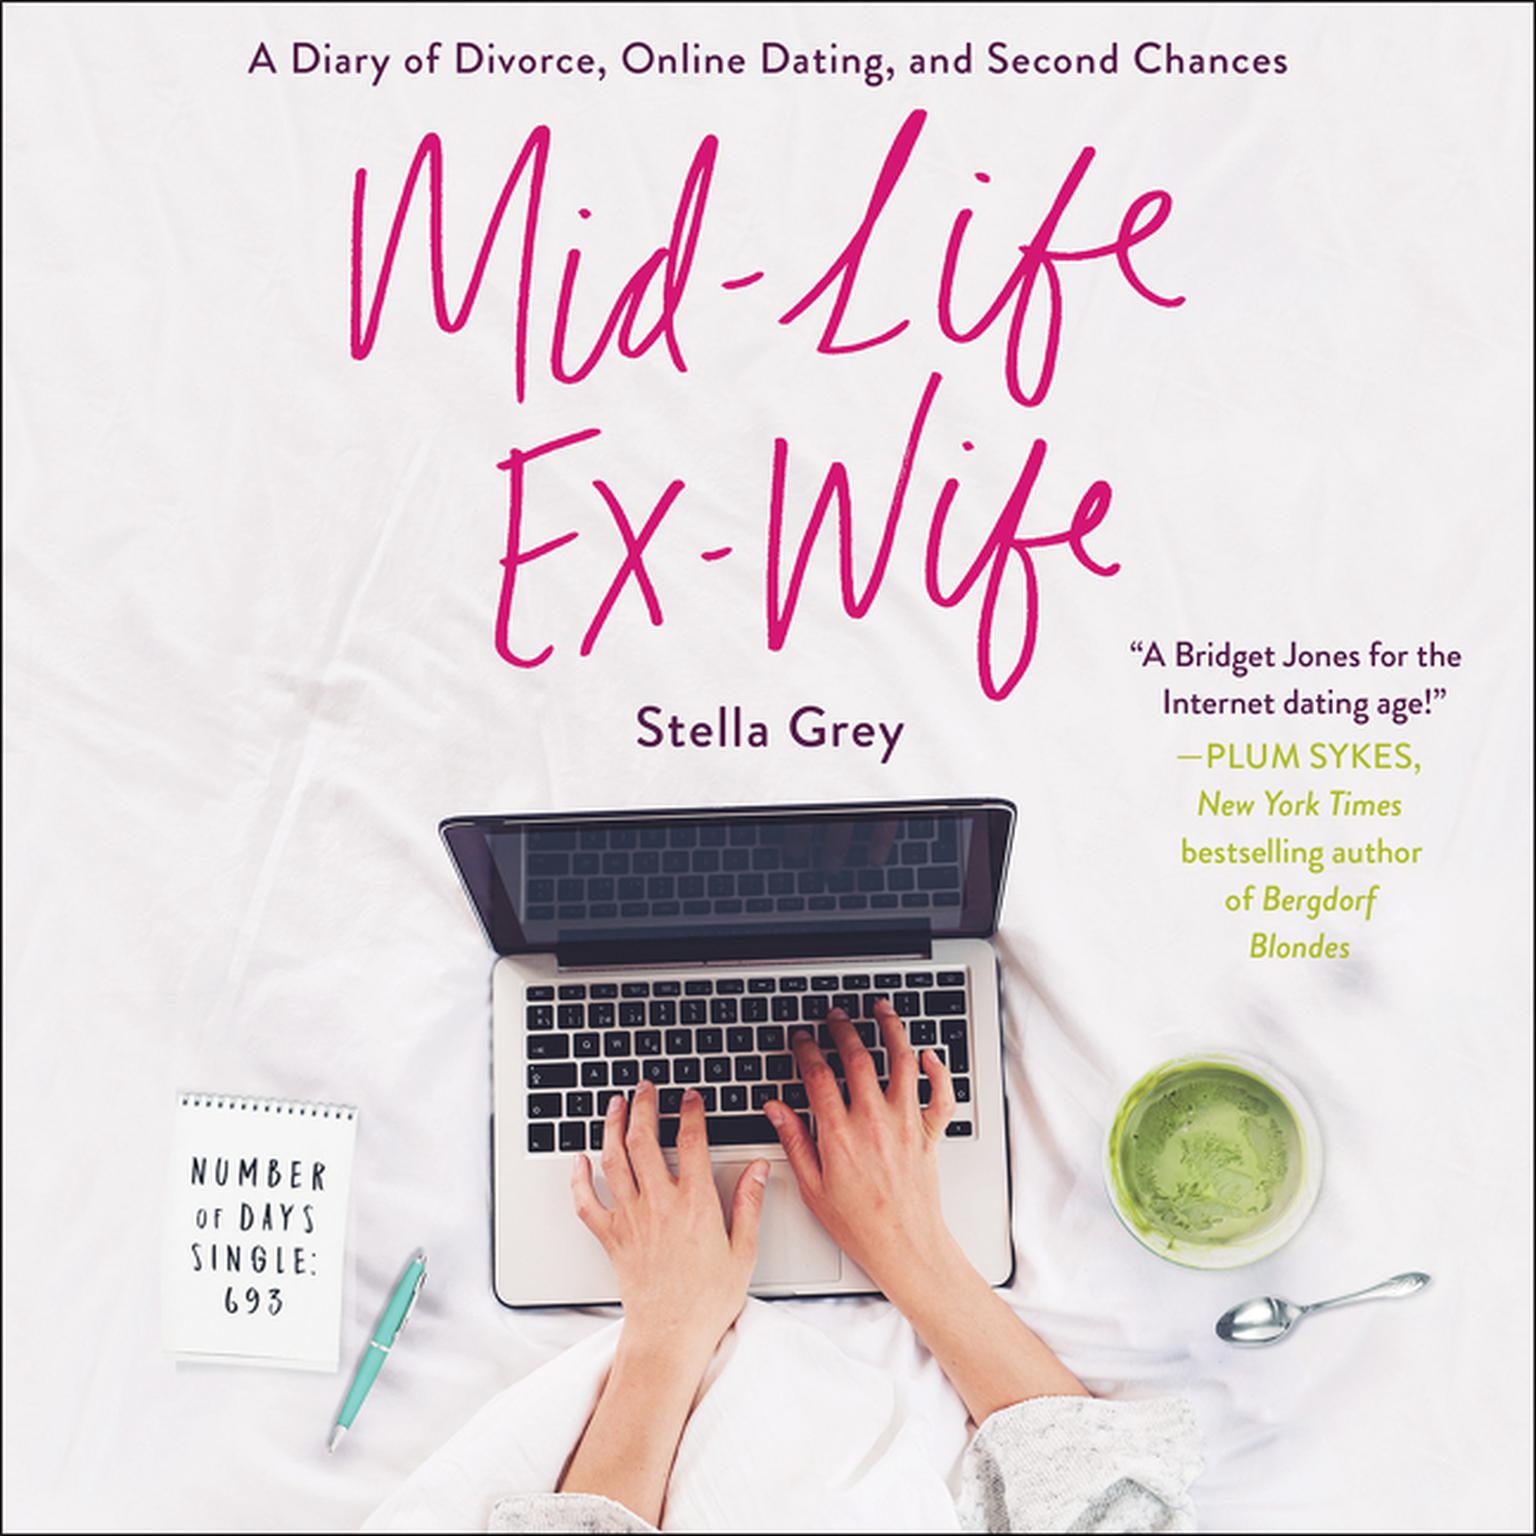 Mid-Life Ex-Wife: A Diary of Divorce, Online Dating, and Second Chances Audiobook, by Stella Grey